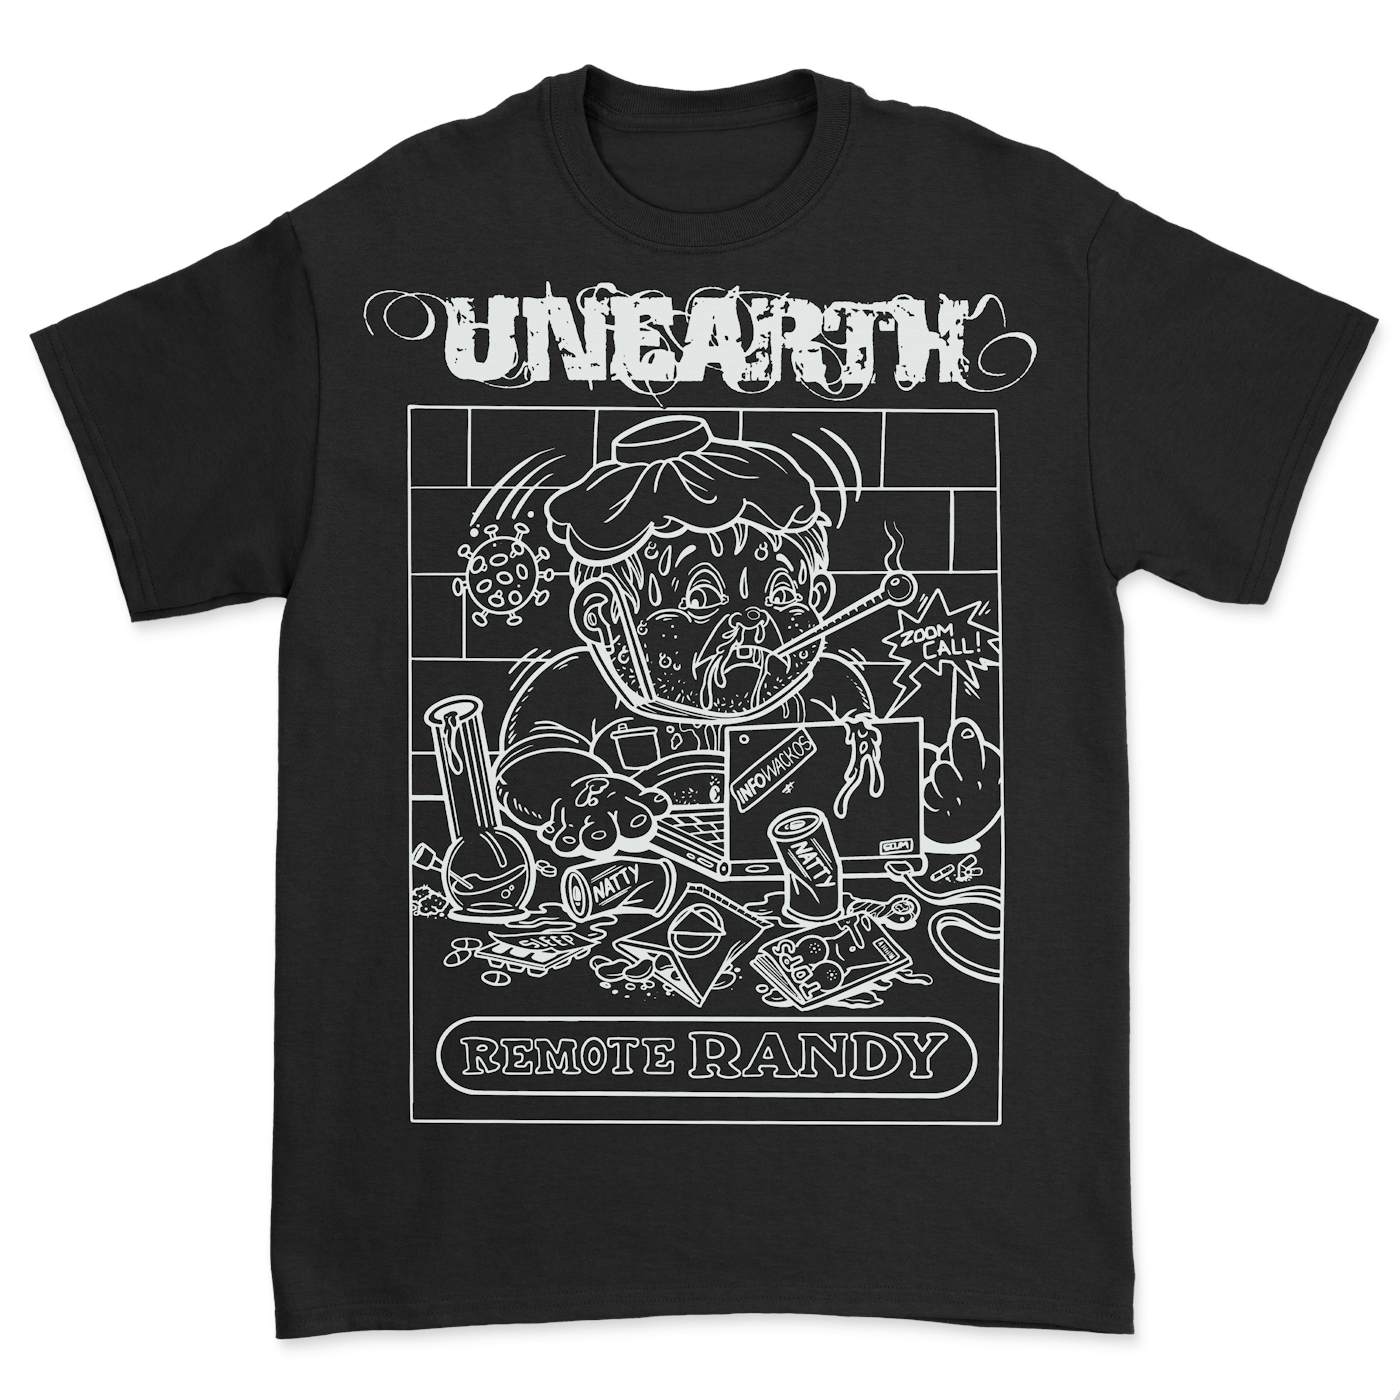 Unearth "Remote Randy" Glow in the Dark Tee